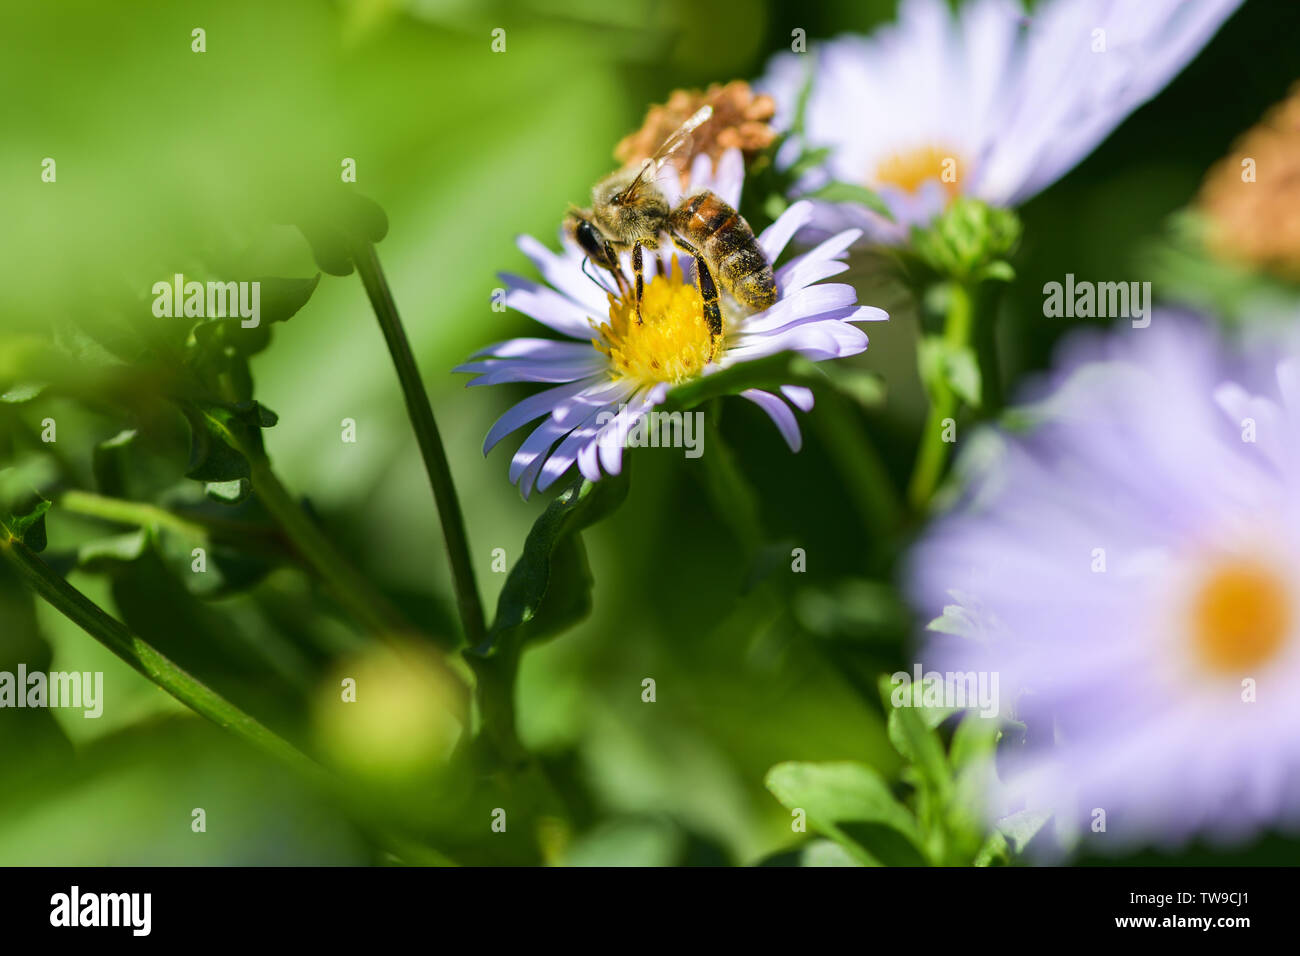 Bee collects nectar on a purple flower.  Macro photography Stock Photo